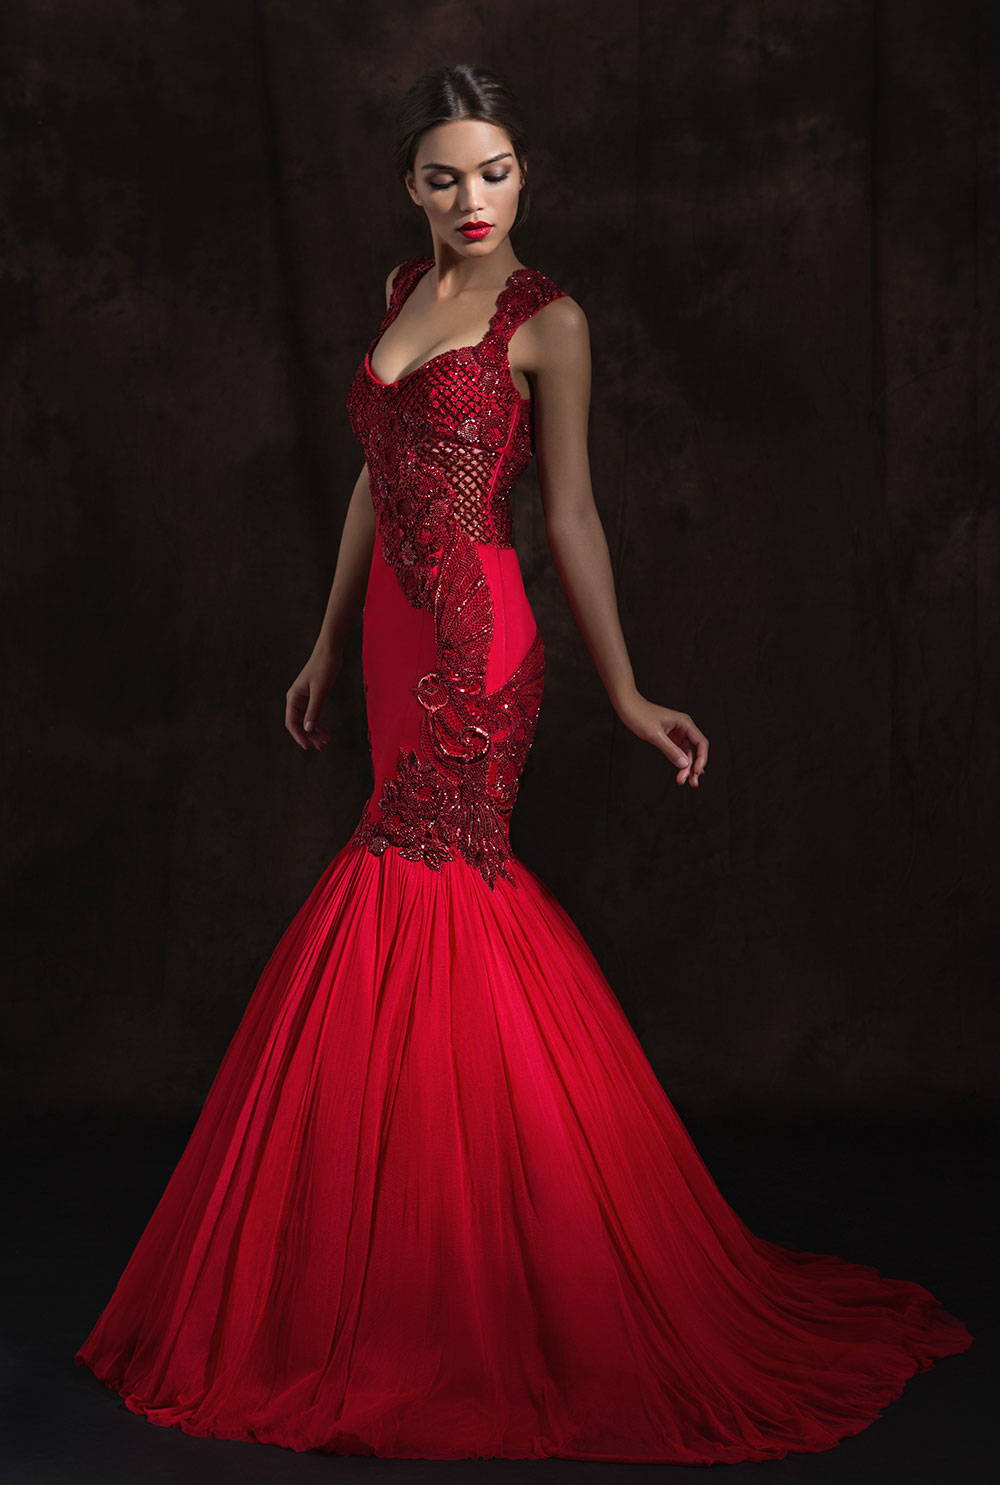 Red fishtail wedding dress with embroidery